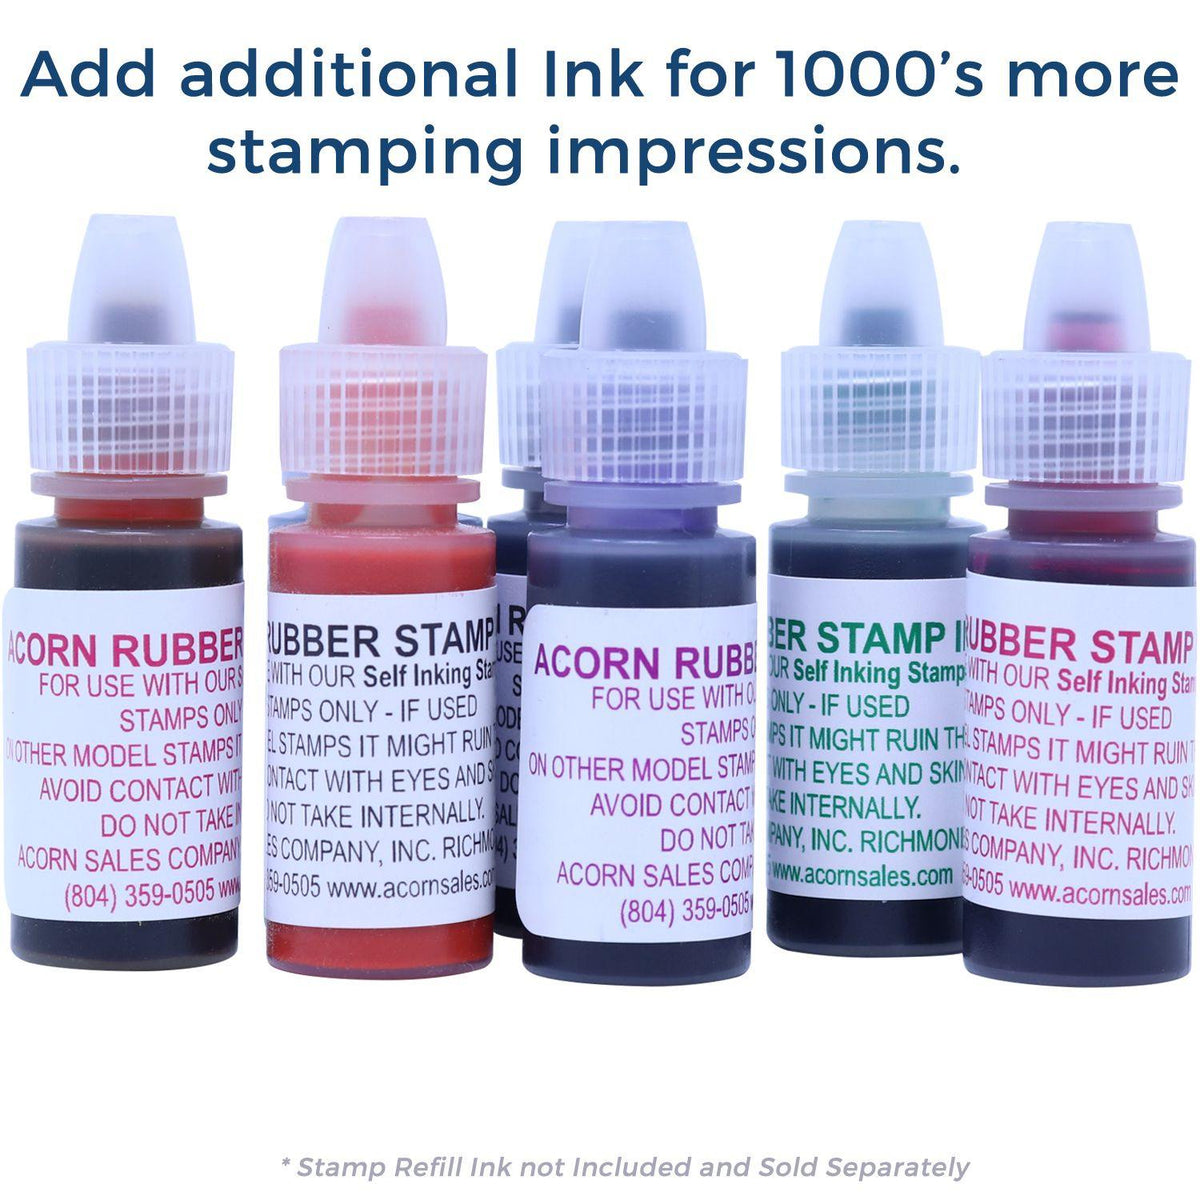 Refill Inks for Large Pre-Inked Times Faxed Stamp Available